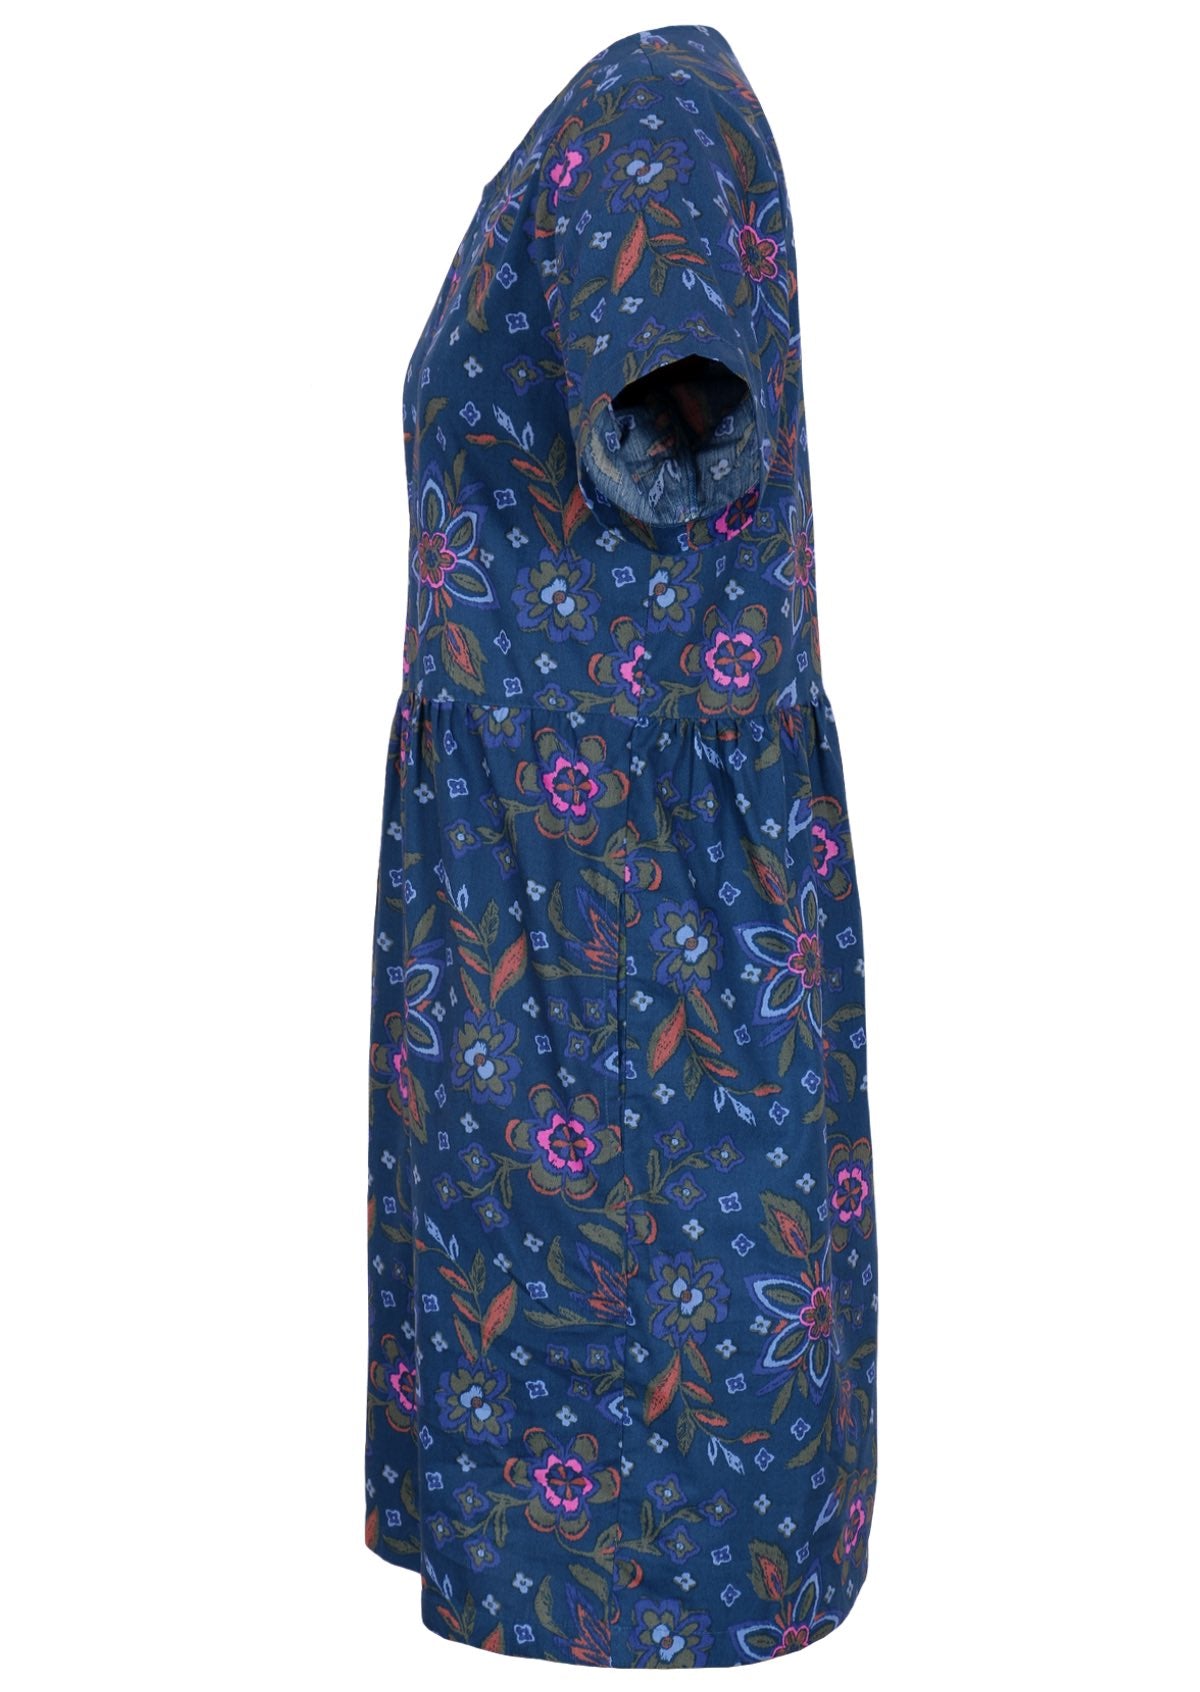 Blue cotton dress with floral pattern has a high round neckline and short sleeves. 